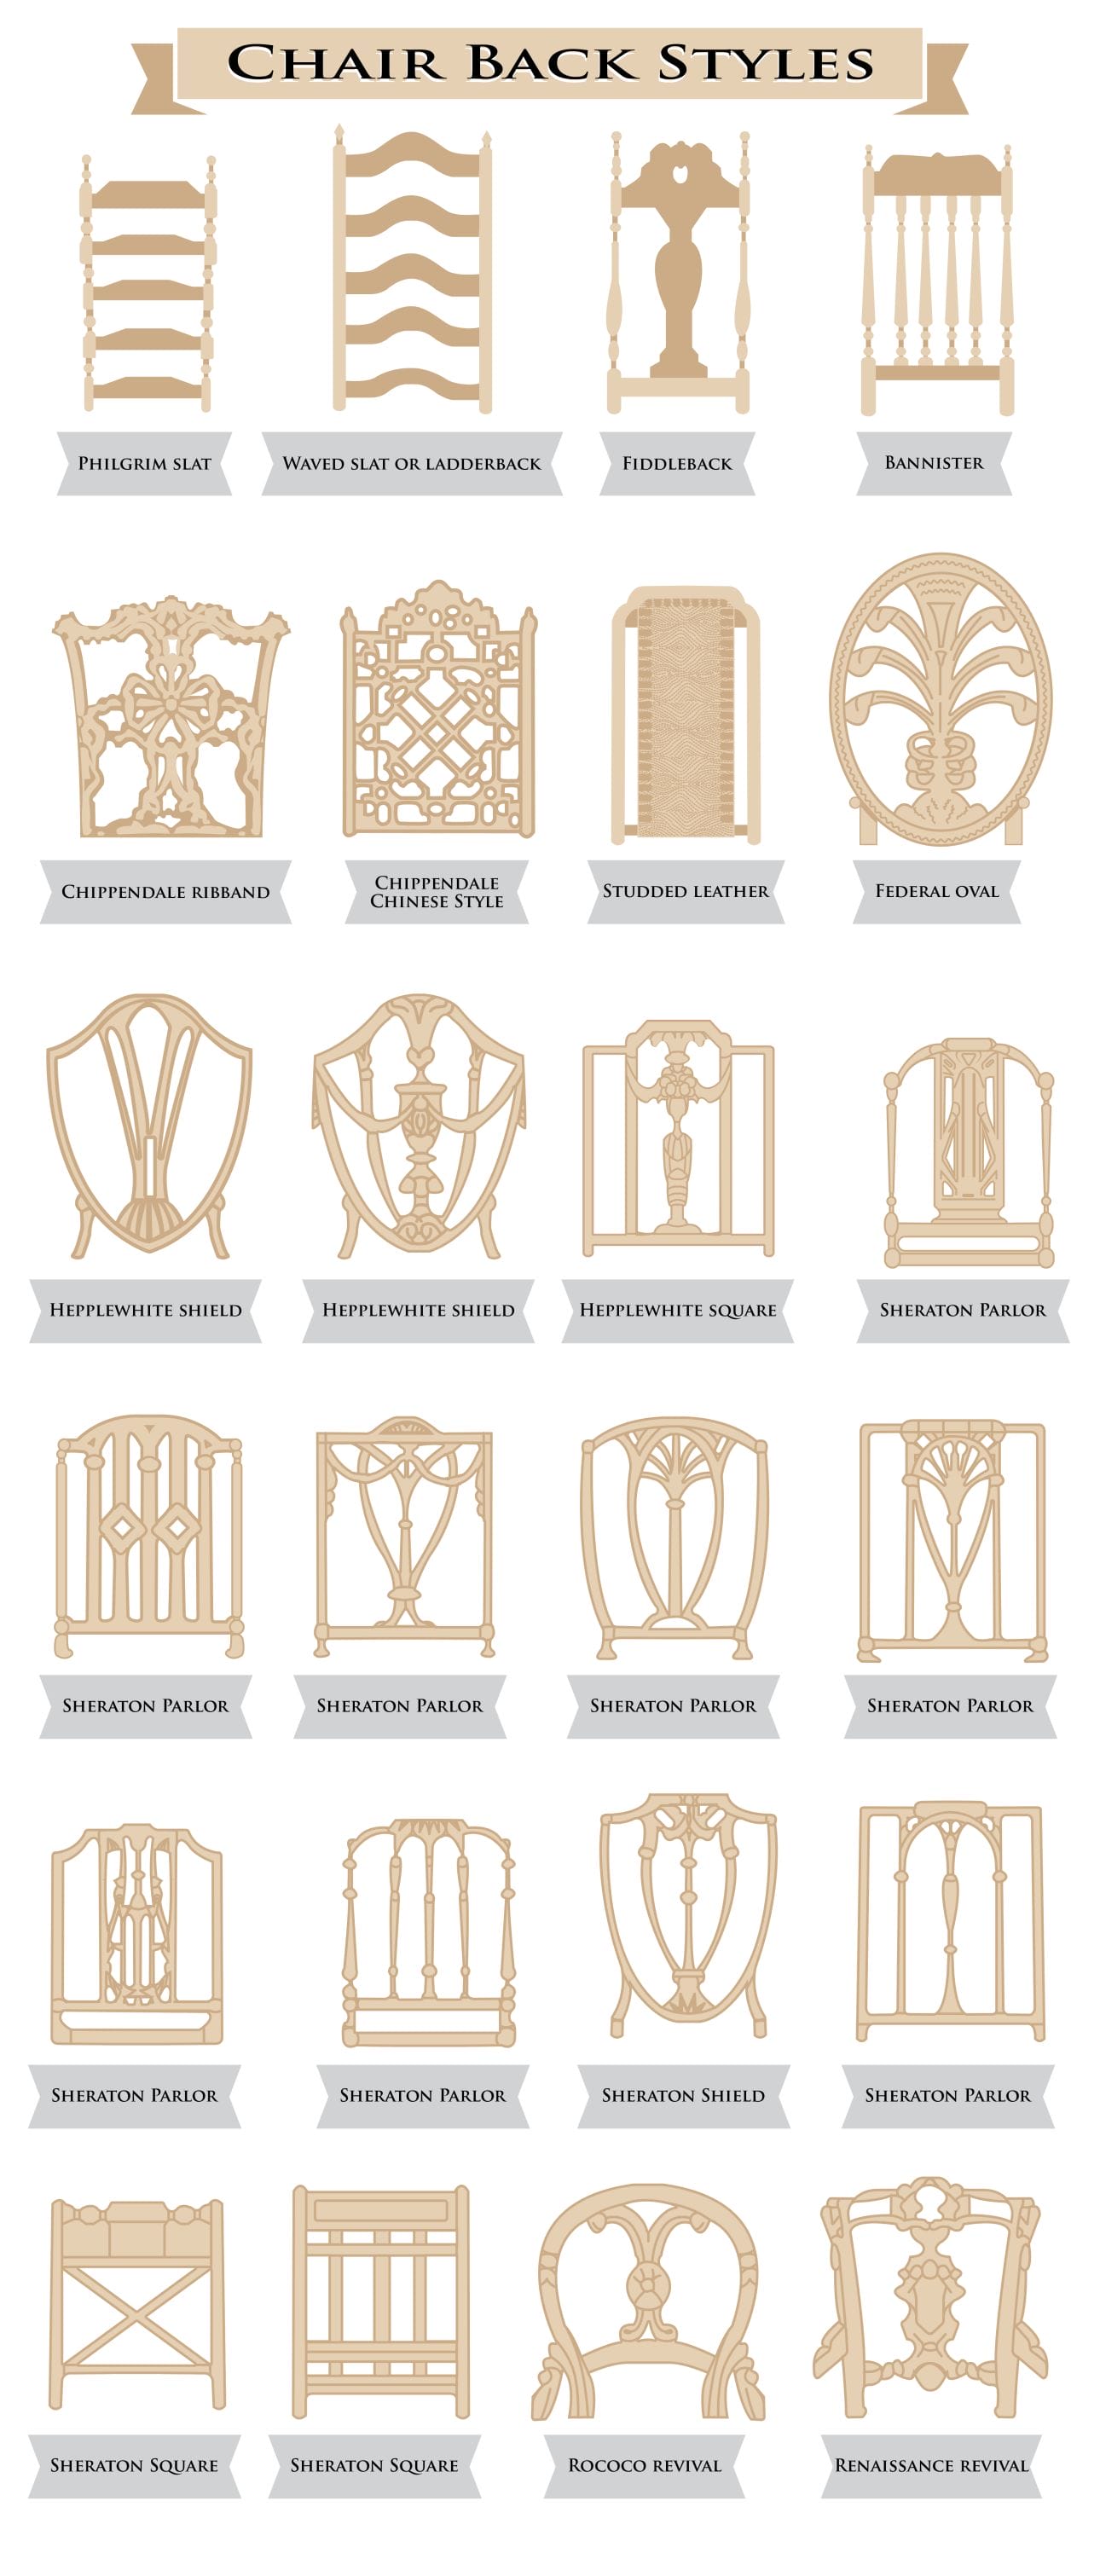 Types of chairs